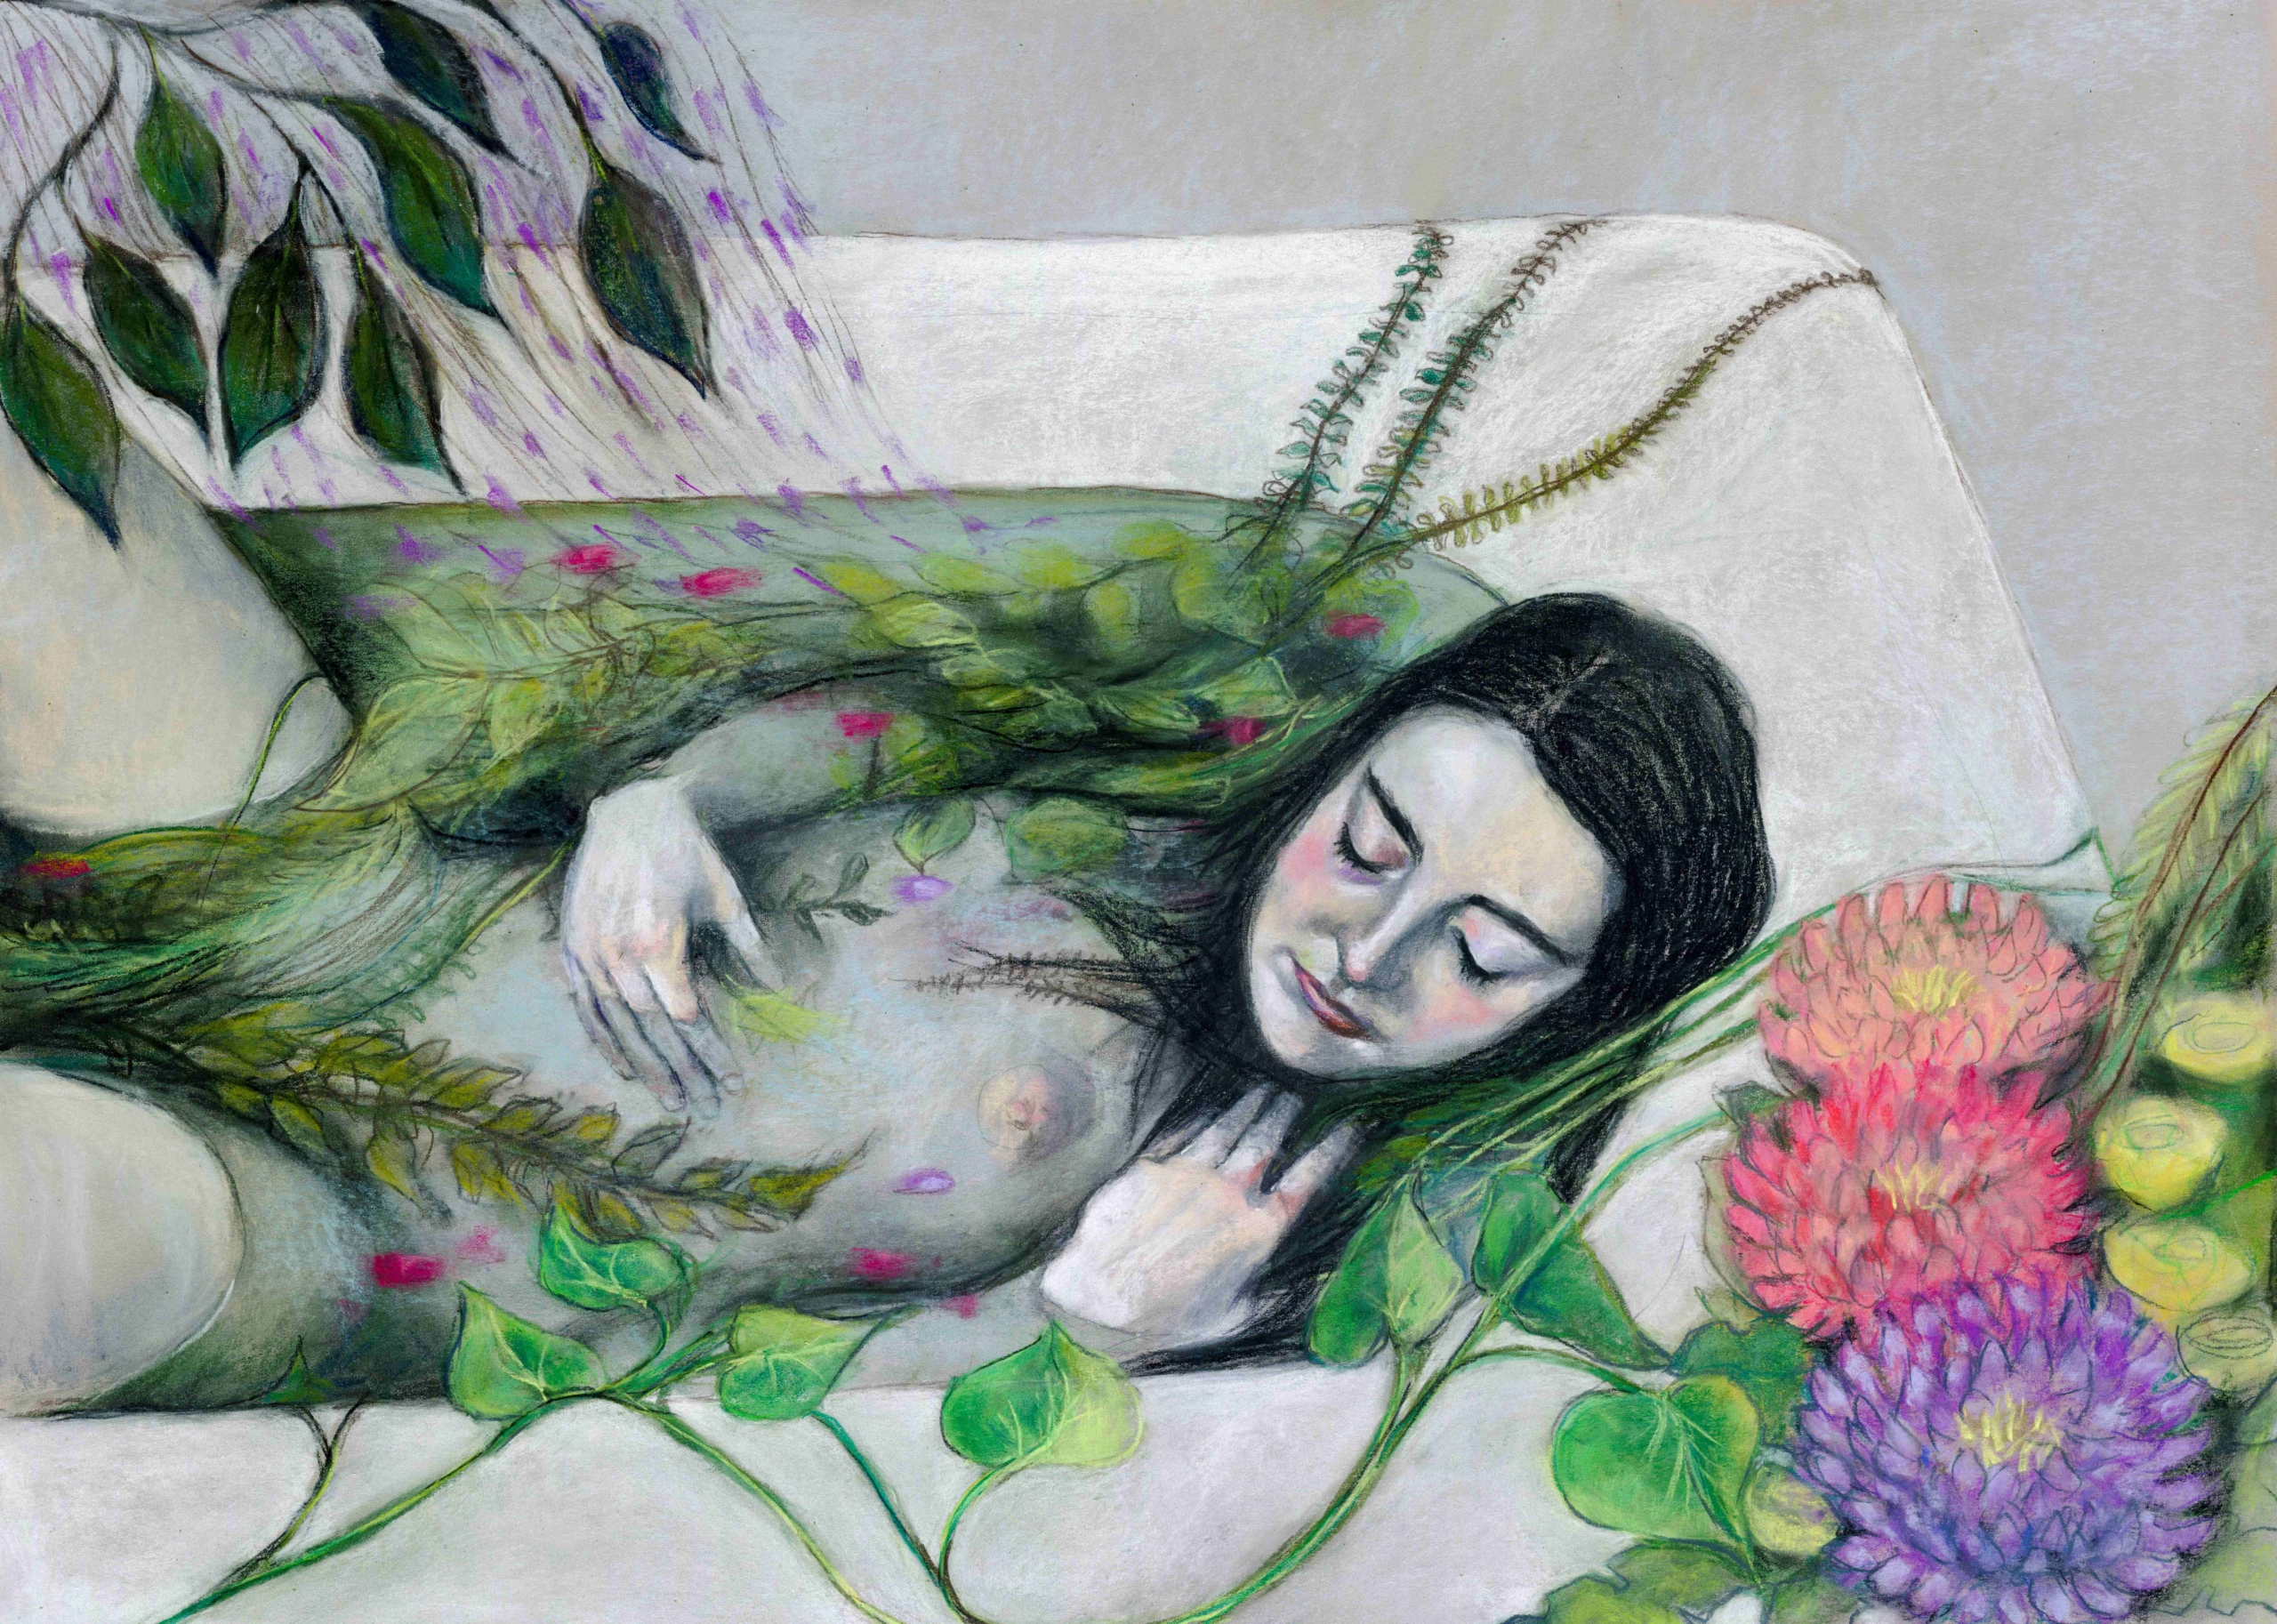 Ophelia in the Bath #2, drawing by Laini Eckardt